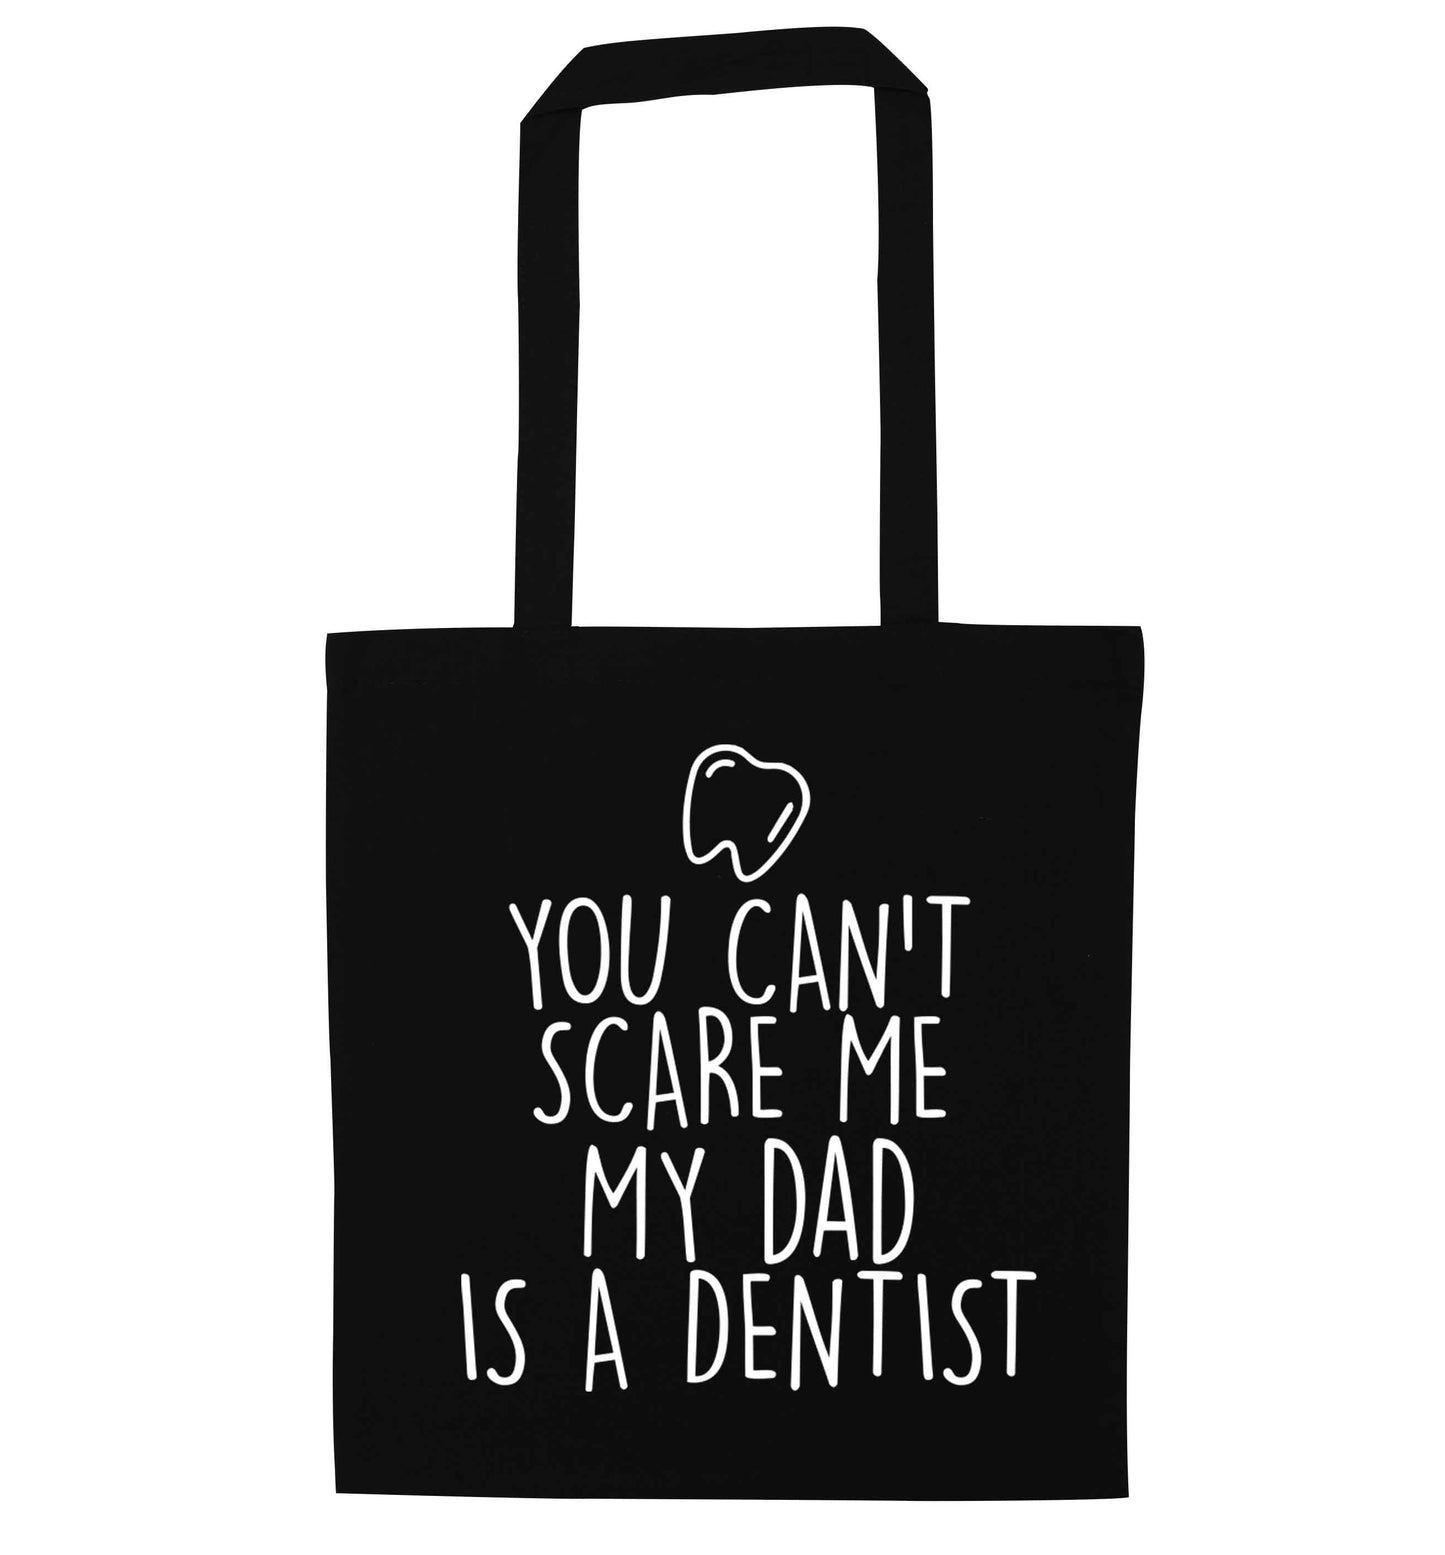 You can't scare me my dad is a dentist black tote bag